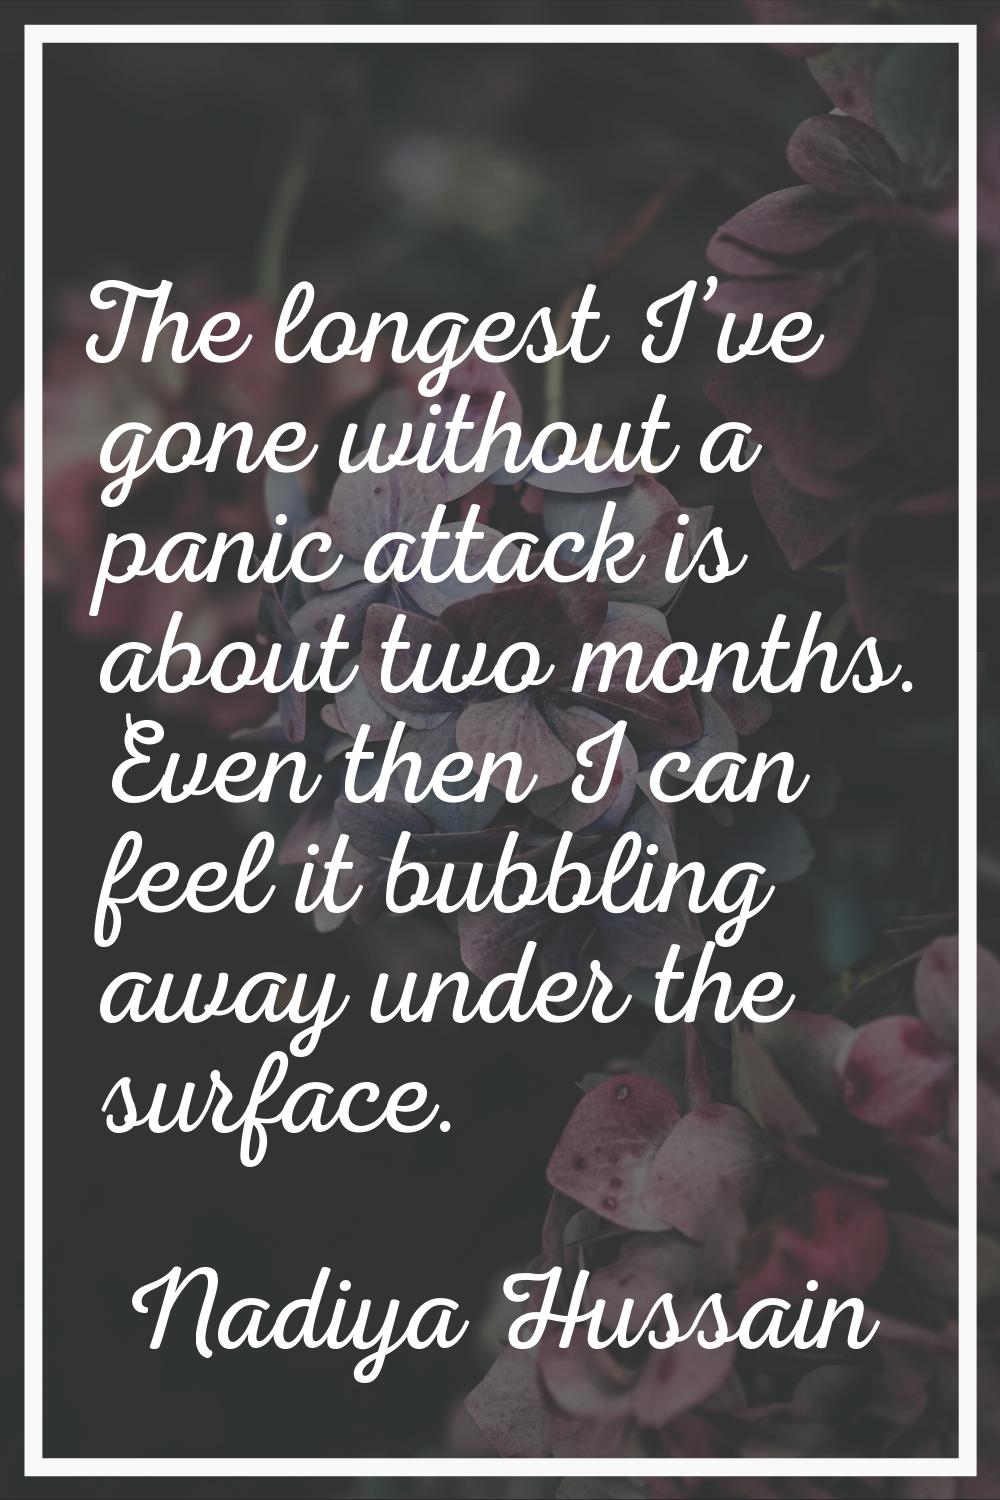 The longest I’ve gone without a panic attack is about two months. Even then I can feel it bubbling 